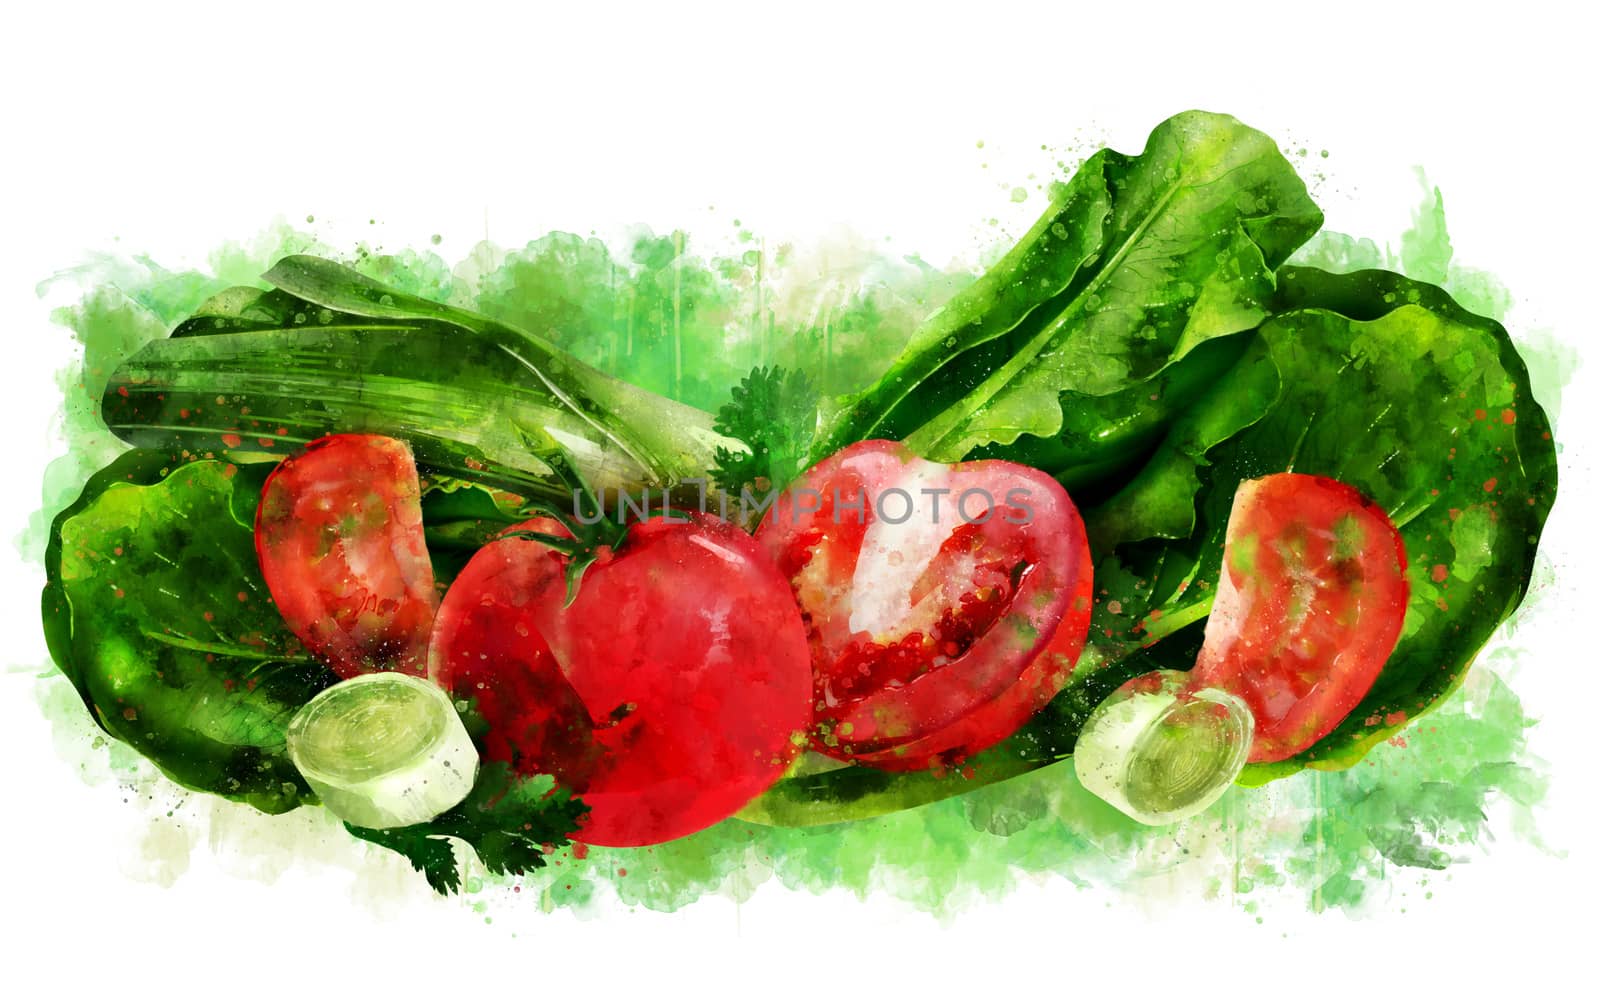 Tomato , cucumber and salad on white background. Watercolor illustration by ConceptCafe